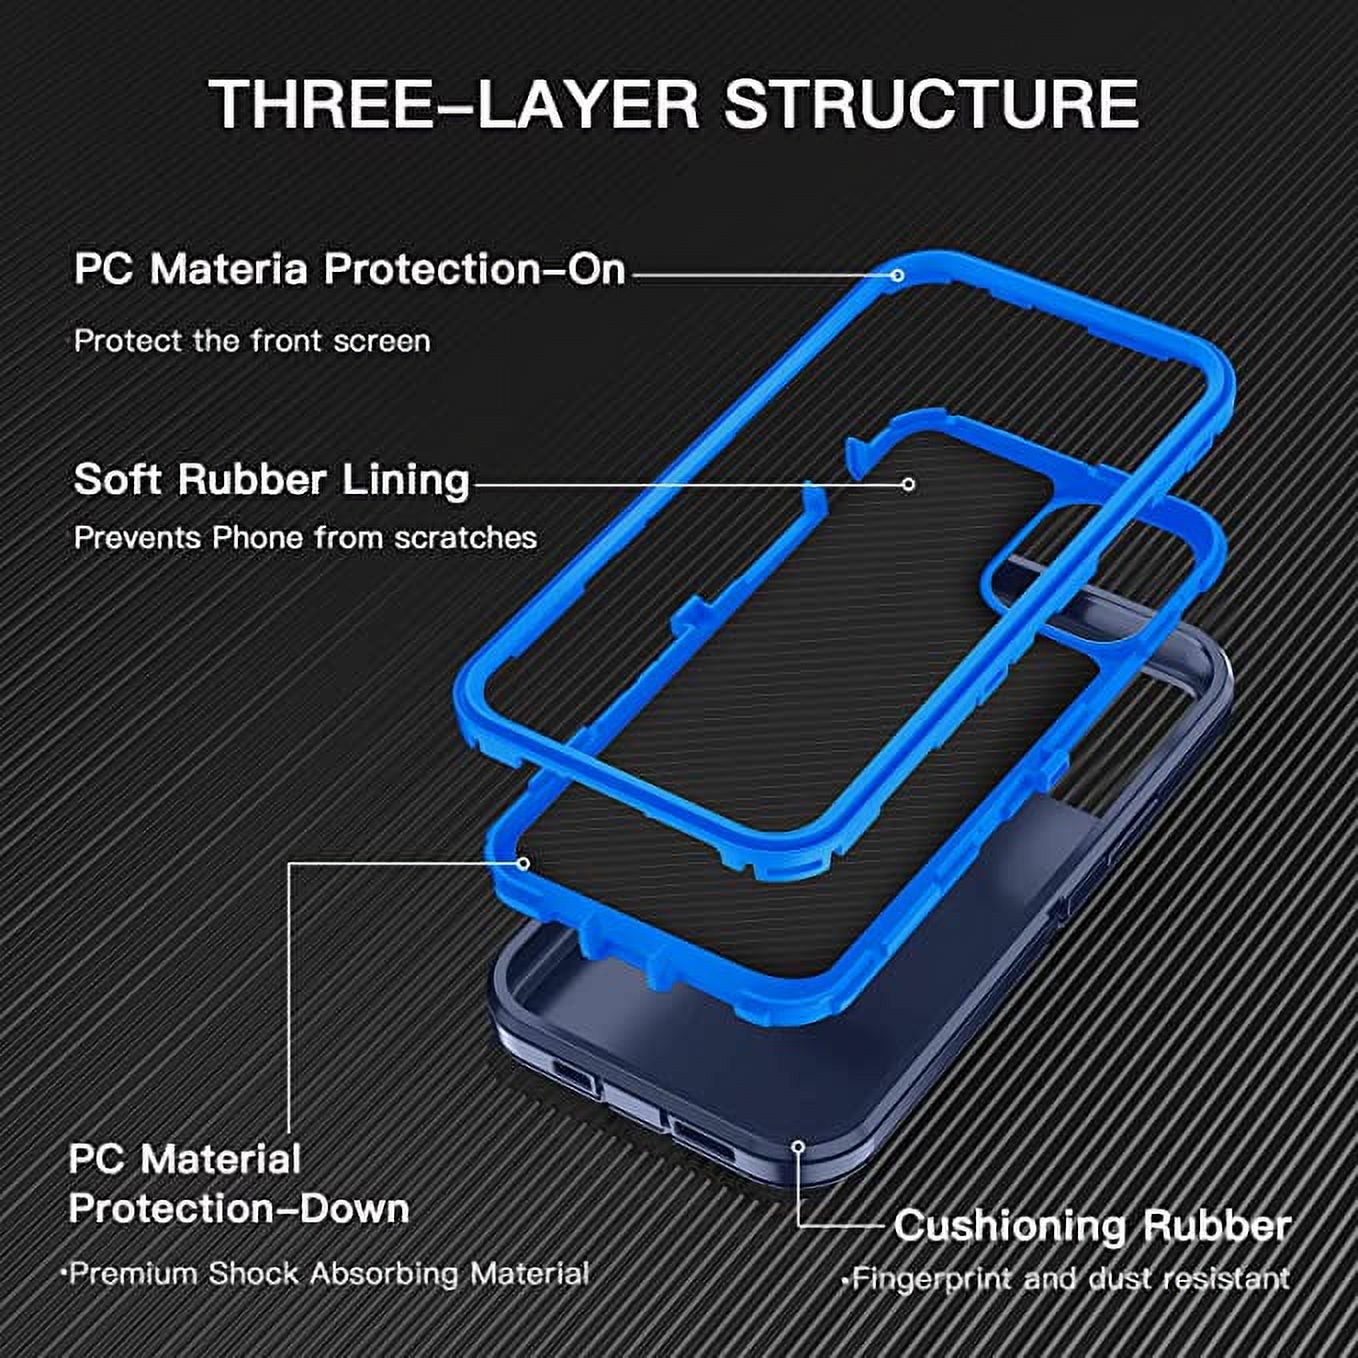 iPhone 11 Pro Heavy Duty Case {Shock Proof-Shatter Resistant -3 Layer Rubber- Compatible for iPhone 11 Pro } Color Blue - By Entronix - image 3 of 7